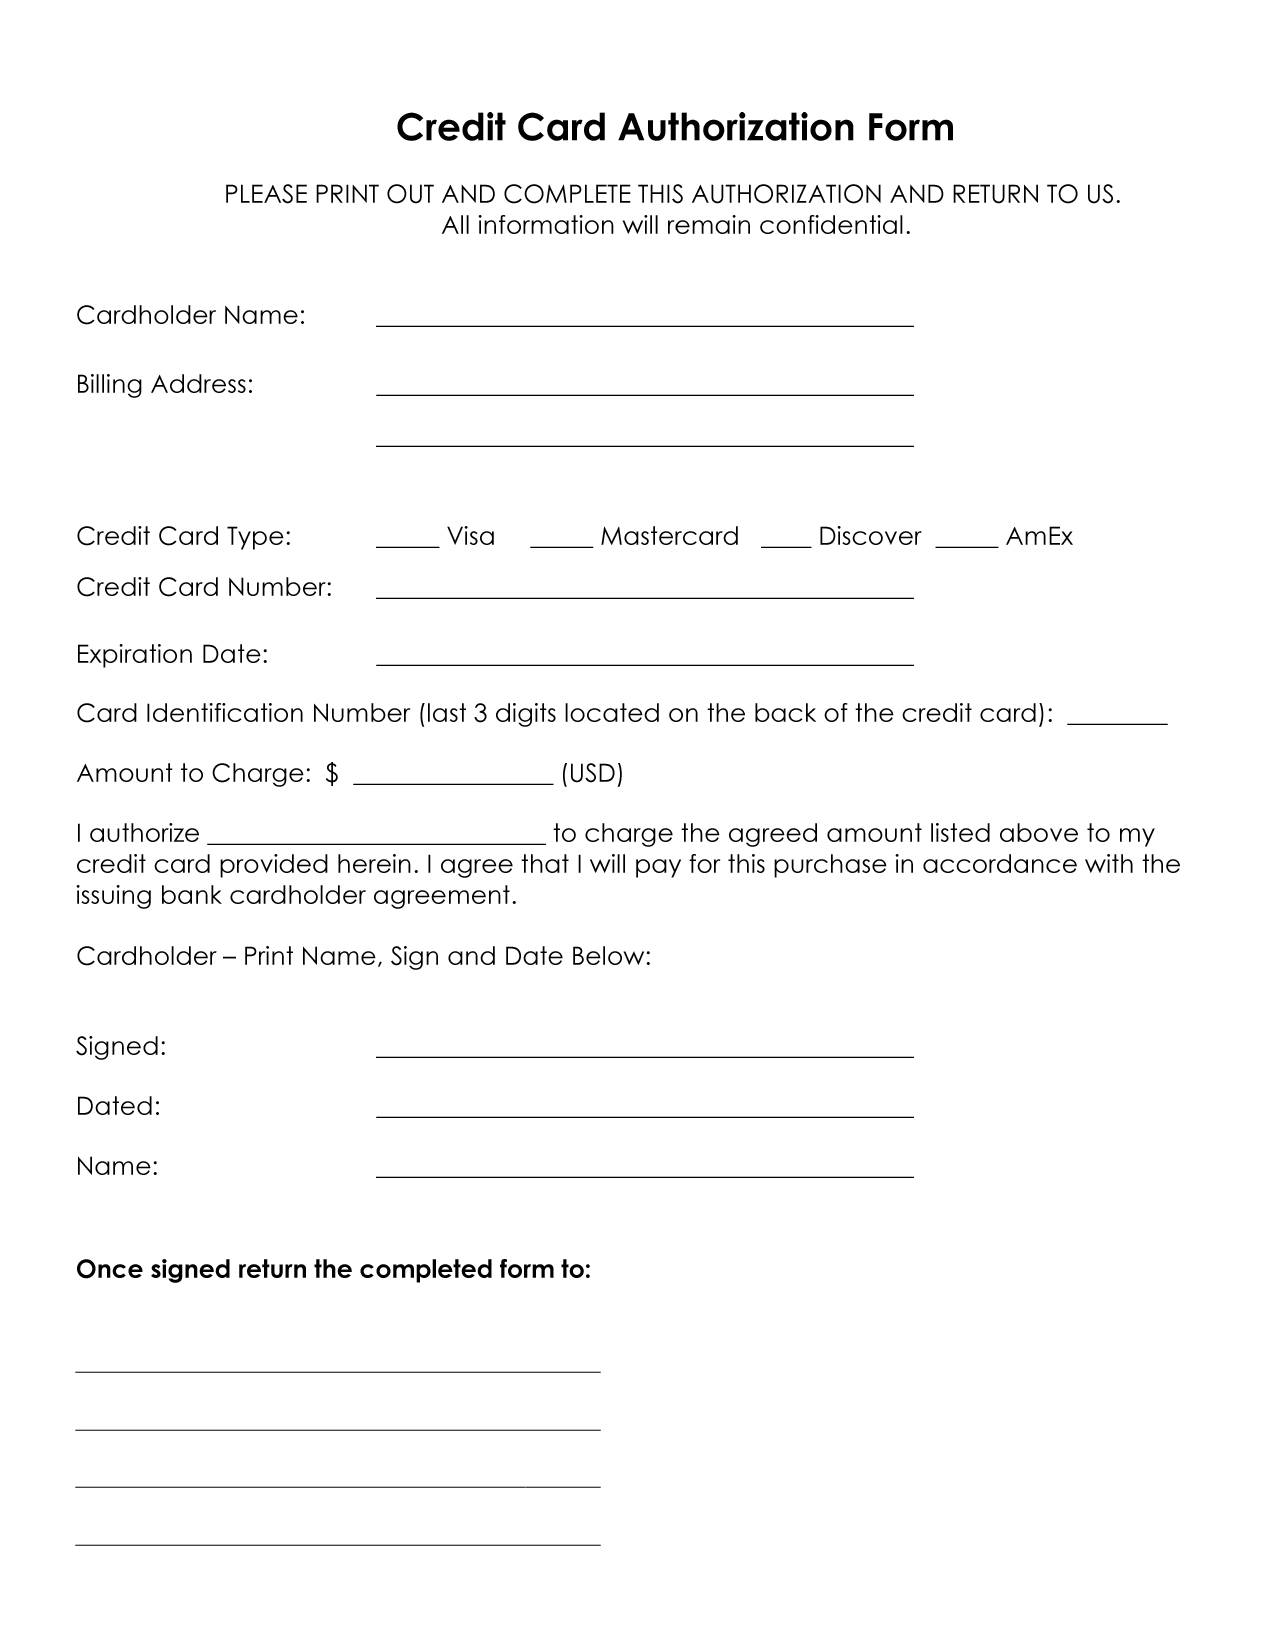 Credit card authorization forms from Service Related. Generic 